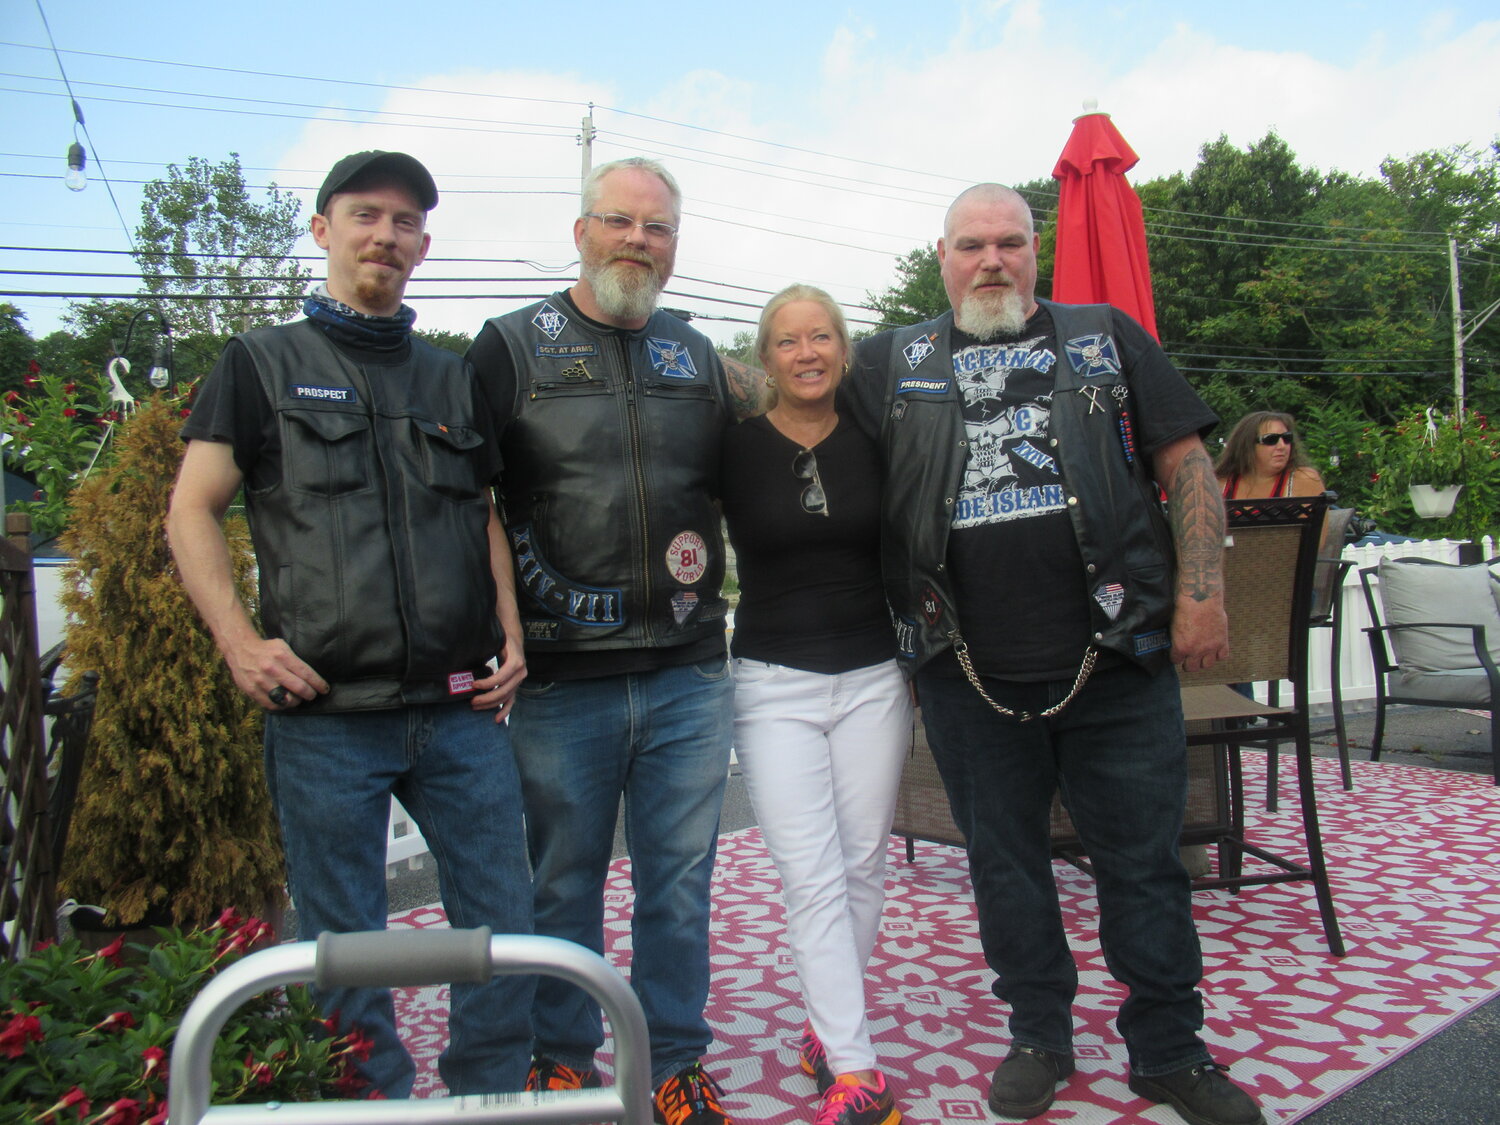 GRAND GIVERS: Michele Brannigan, Senior Philanthropic Officer/Campaign Manager at Hasbro Children’s Hospital, is all smiles while standing with the Smiths – Guy, Byron and Mark – of the Vengeance Motorcycle Club for the recent 7th annual run.